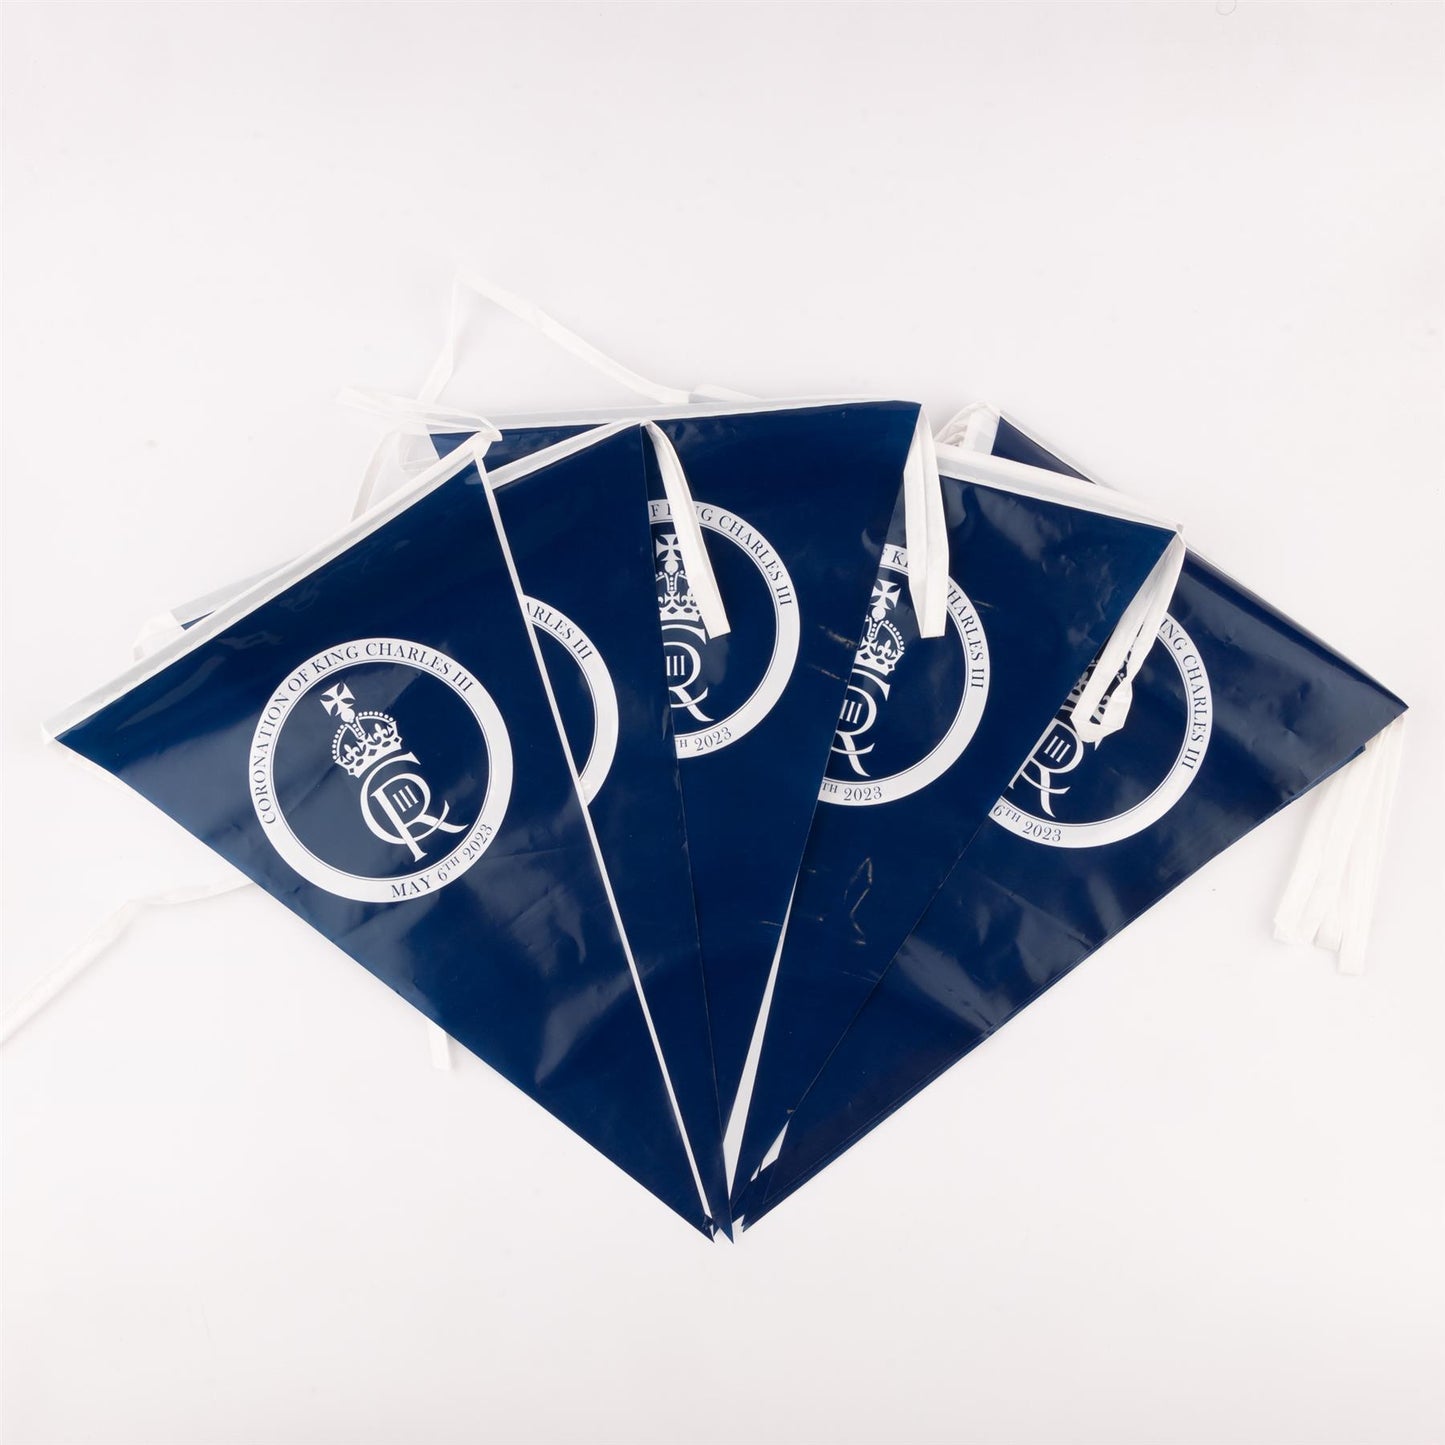 10m Bunting King Charles III Coronation Cypher Blue White Triangle 24 Flags